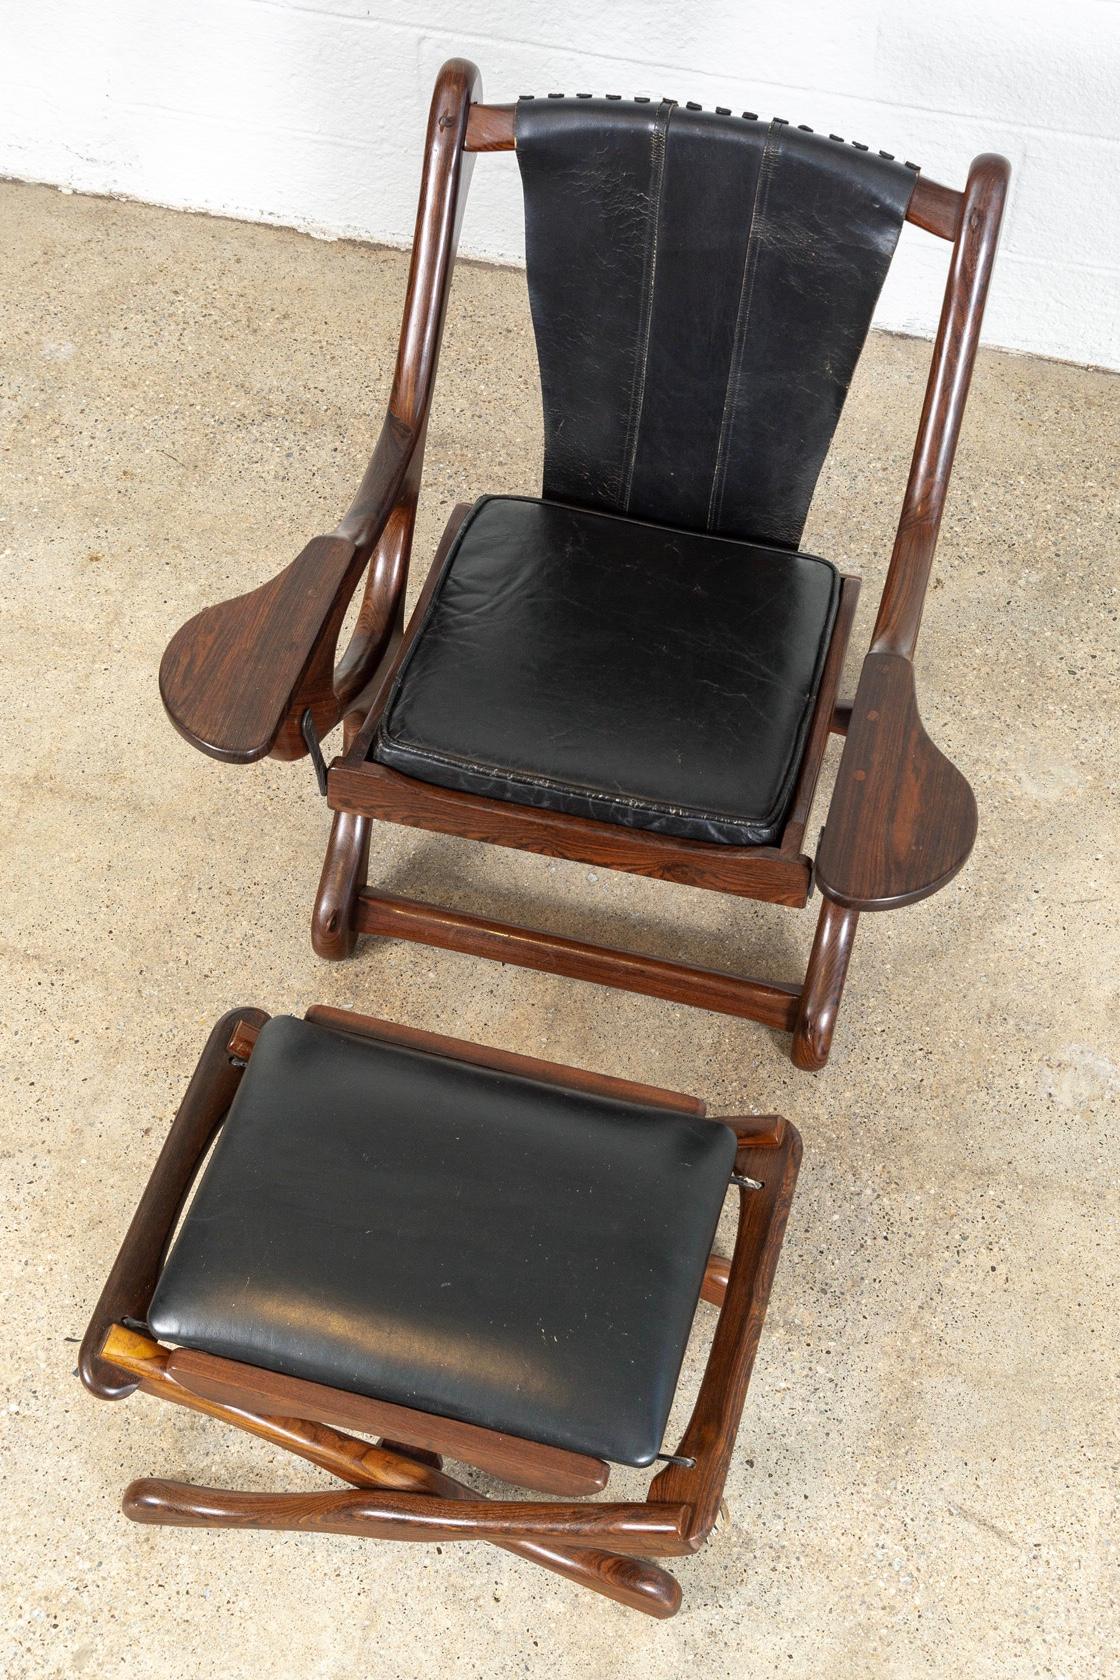 Midcentury Mexican Modern Don Shoemaker Rosewood Swinger Chair with Ottoman For Sale 2